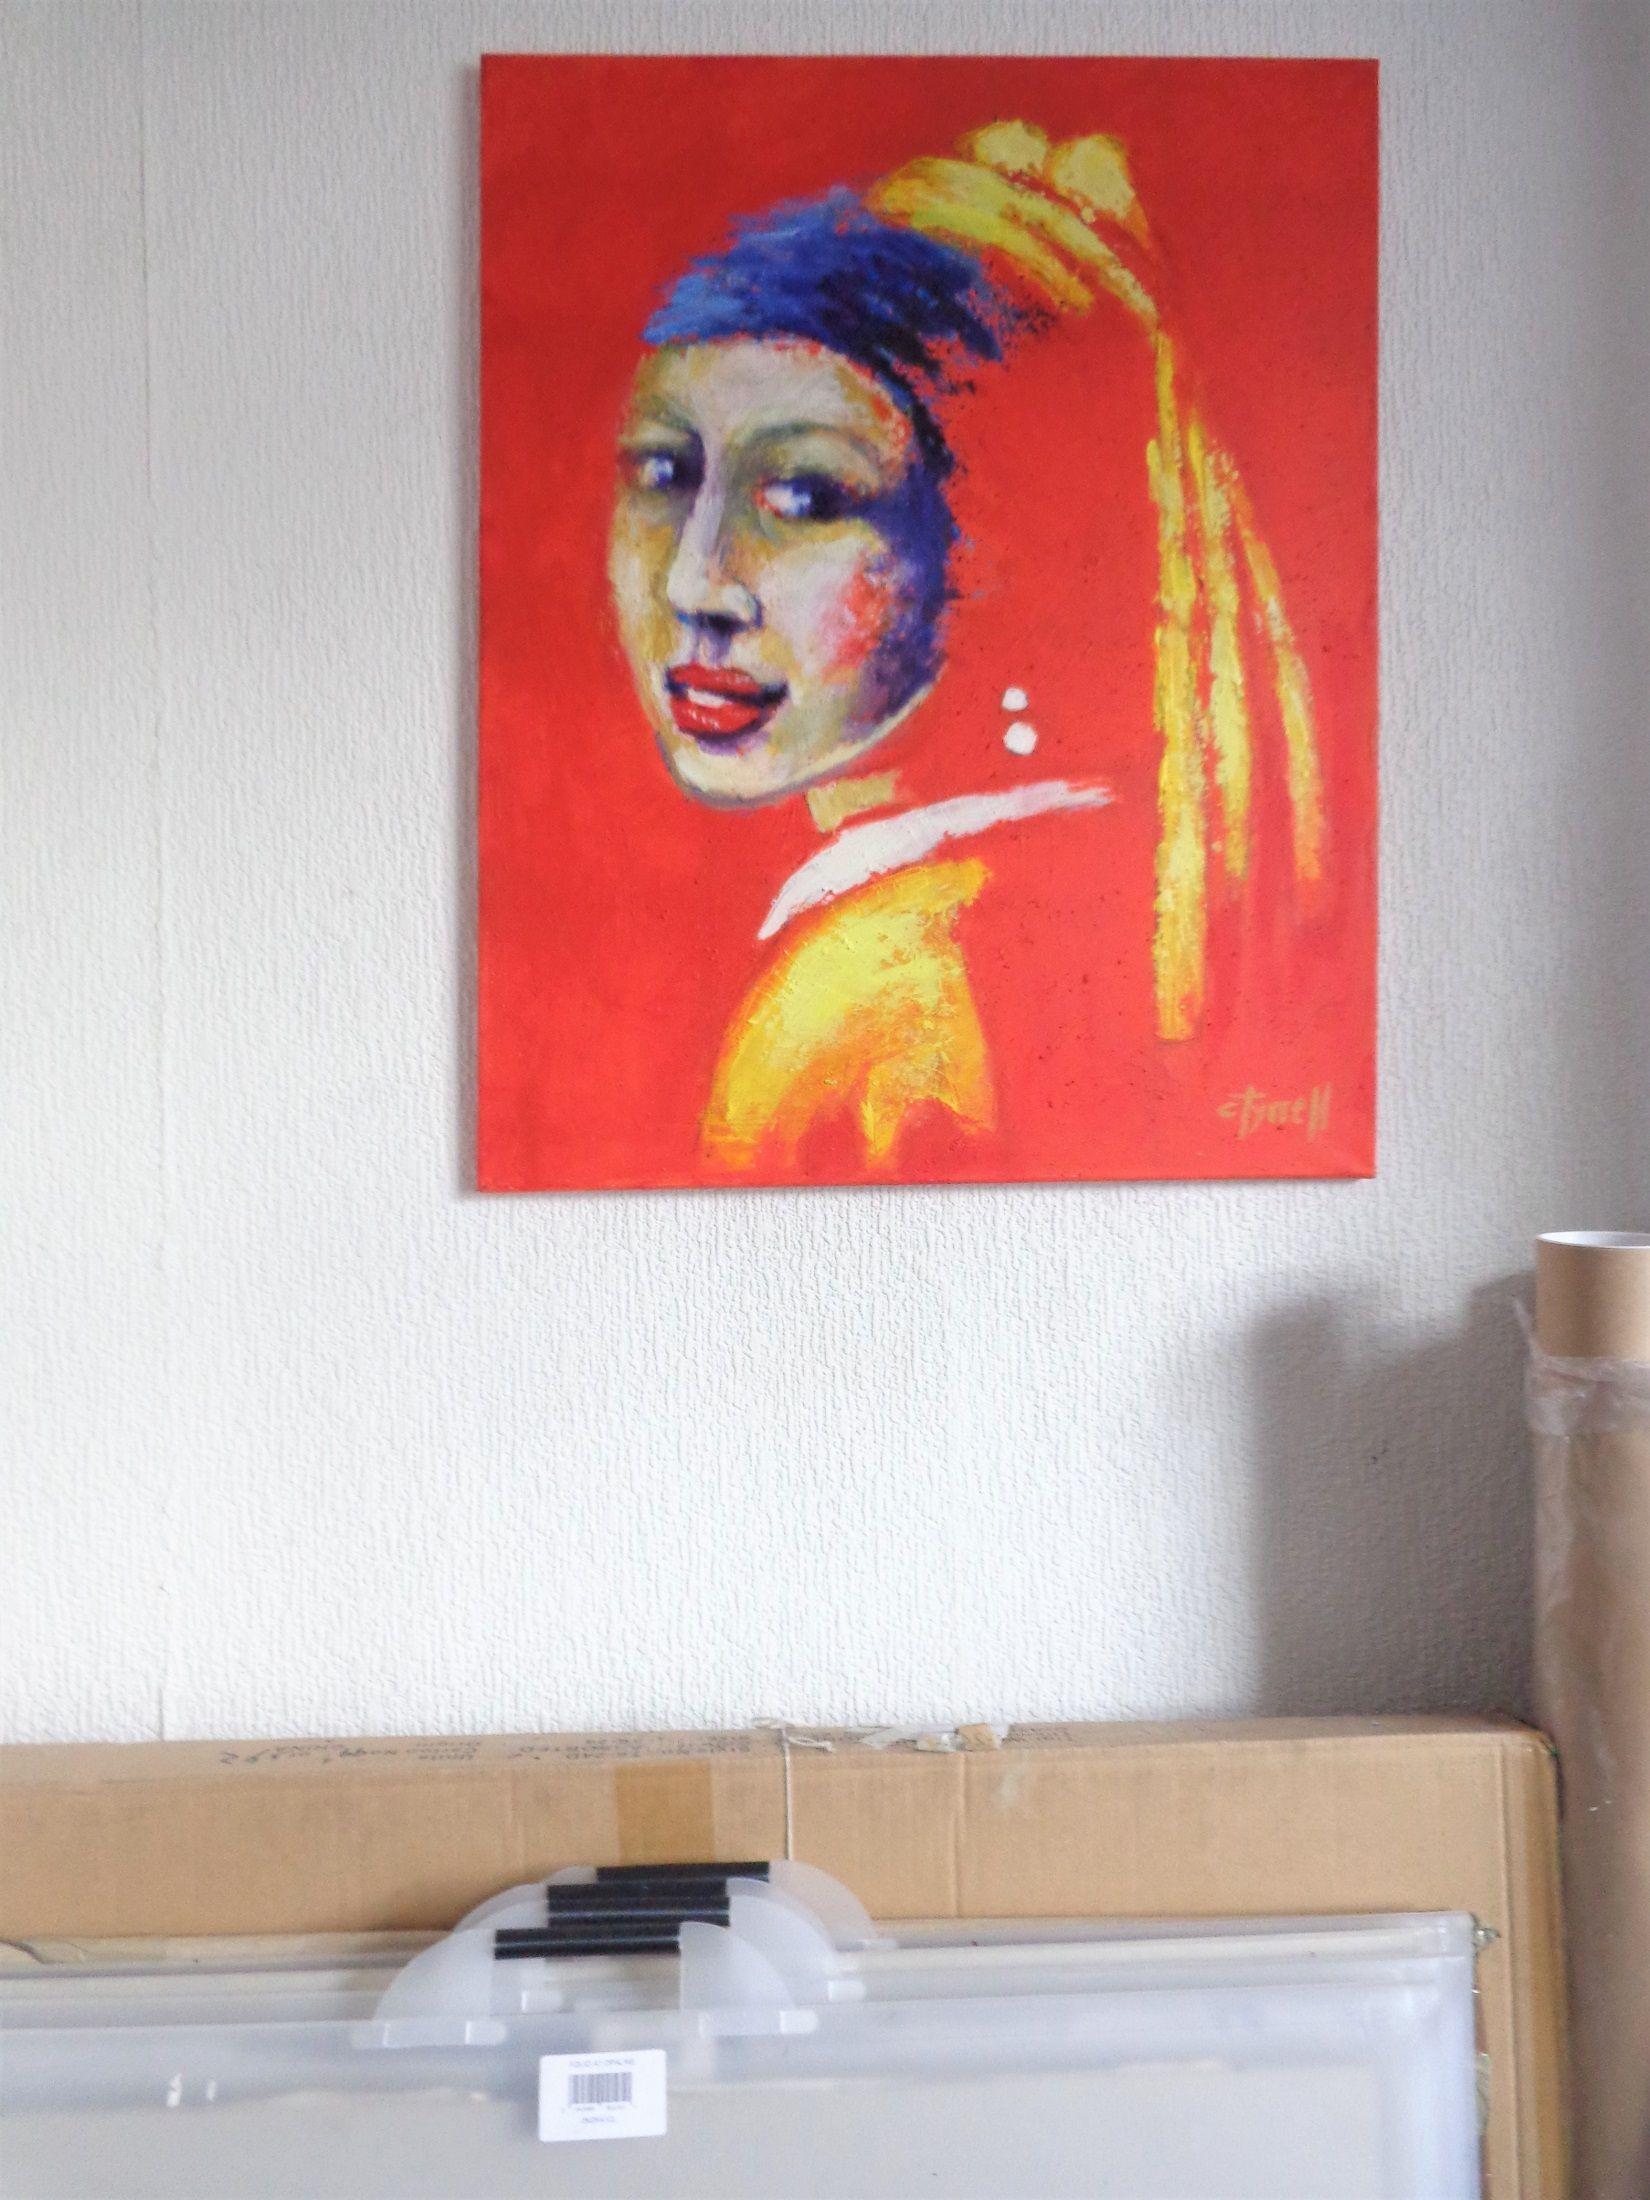 Reworked. Original contemporary figurative acrylics painting on canvas, painted edges and ready to hang. Frame is optional. A semi-abstract portrait of a sensual young woman.  My interpretation inspired by Vermeer painting, 